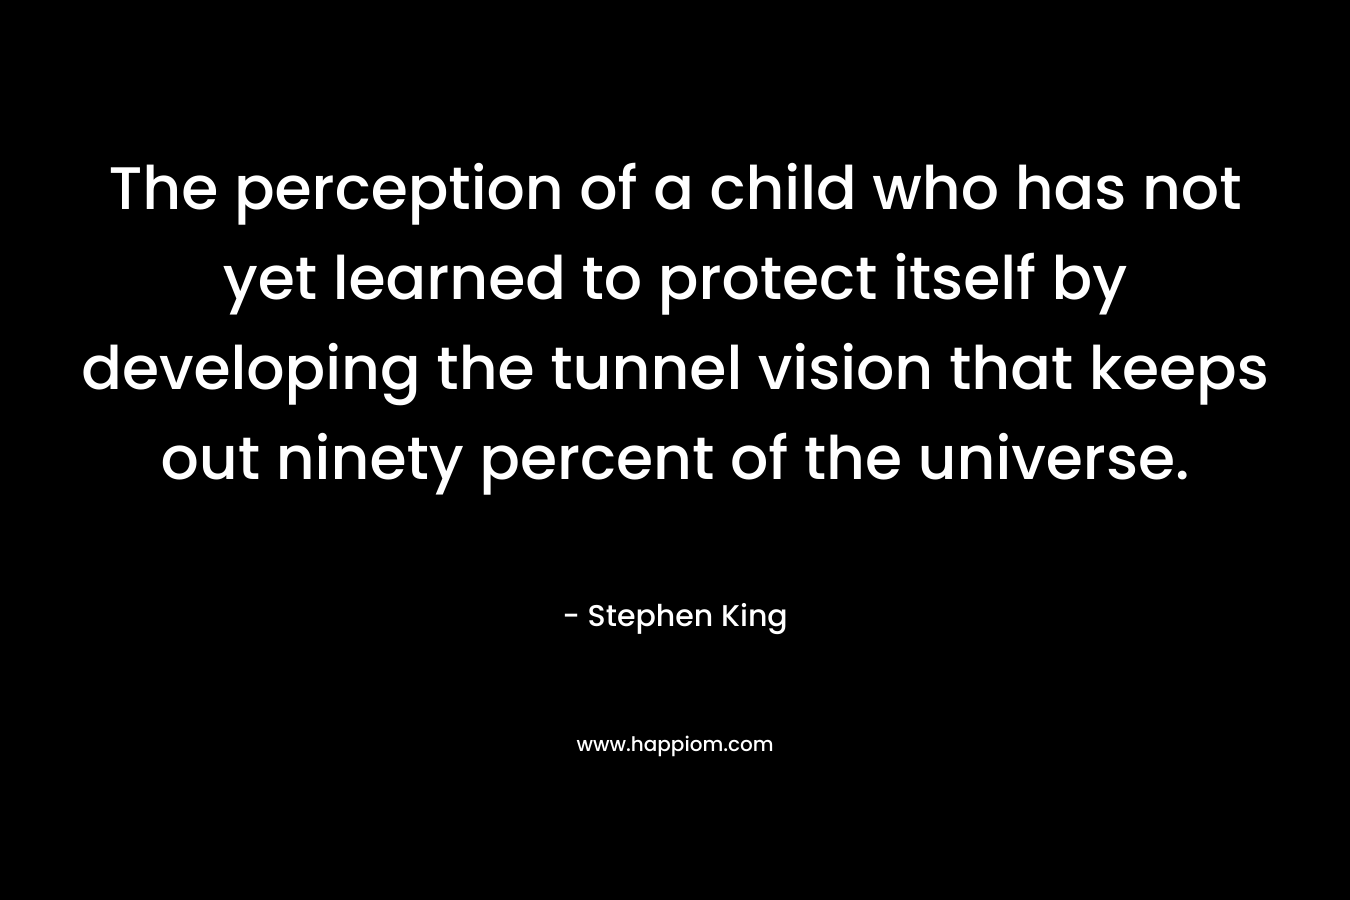 The perception of a child who has not yet learned to protect itself by developing the tunnel vision that keeps out ninety percent of the universe.